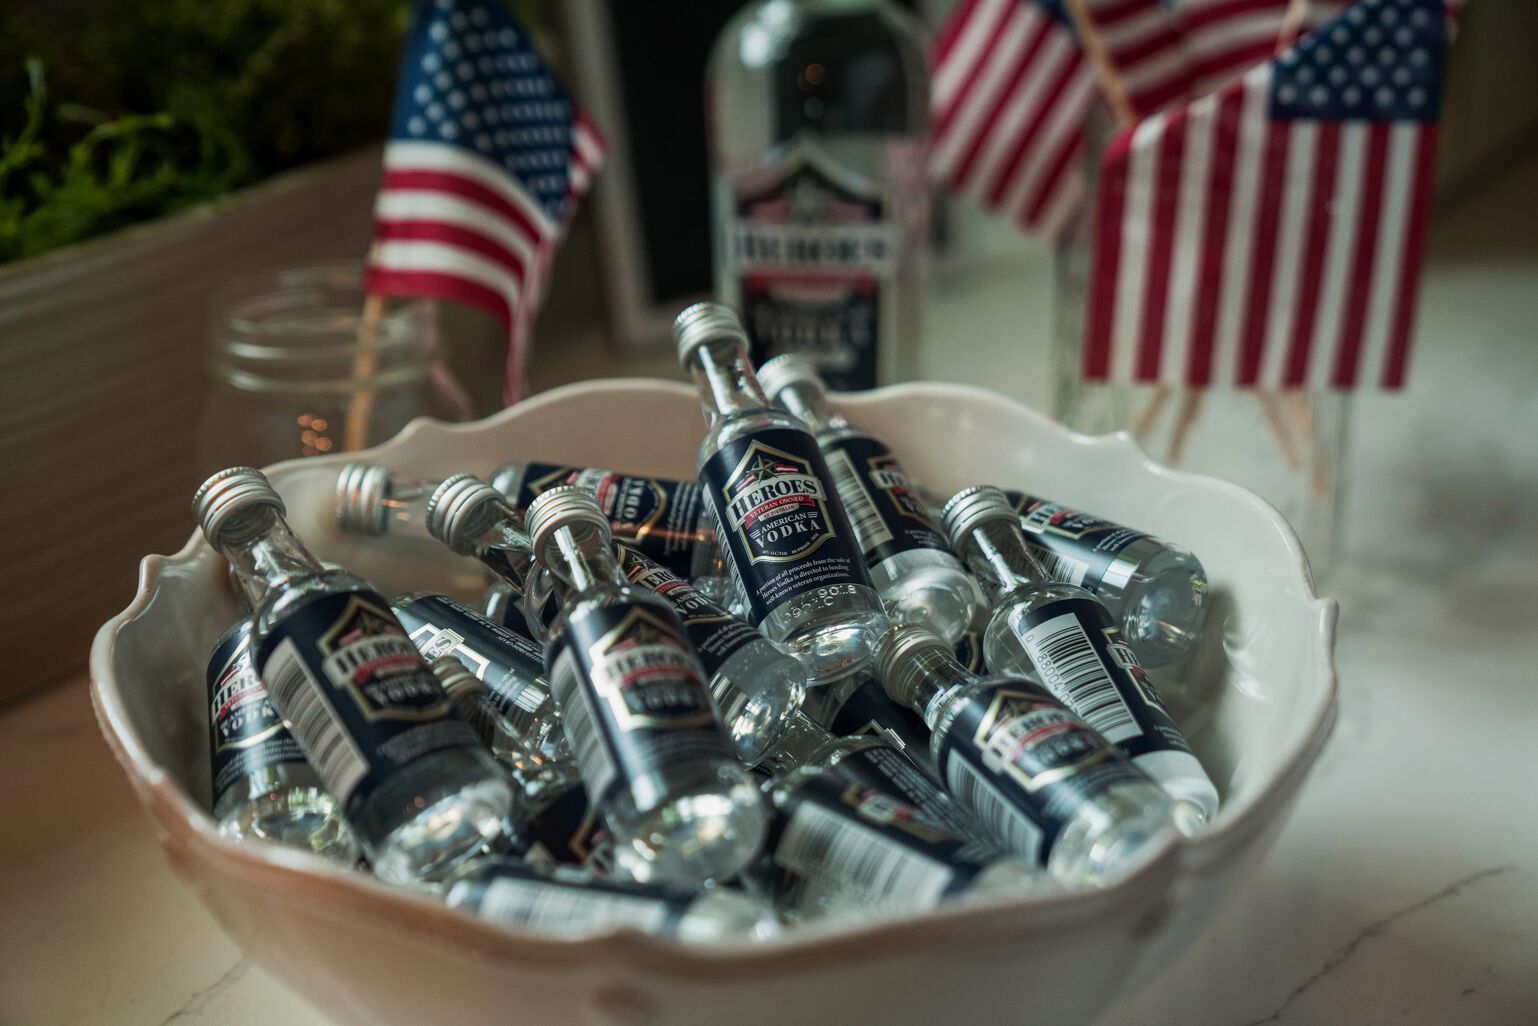 Bottles of Heroes Vodka in a bowl with US Flags in the background